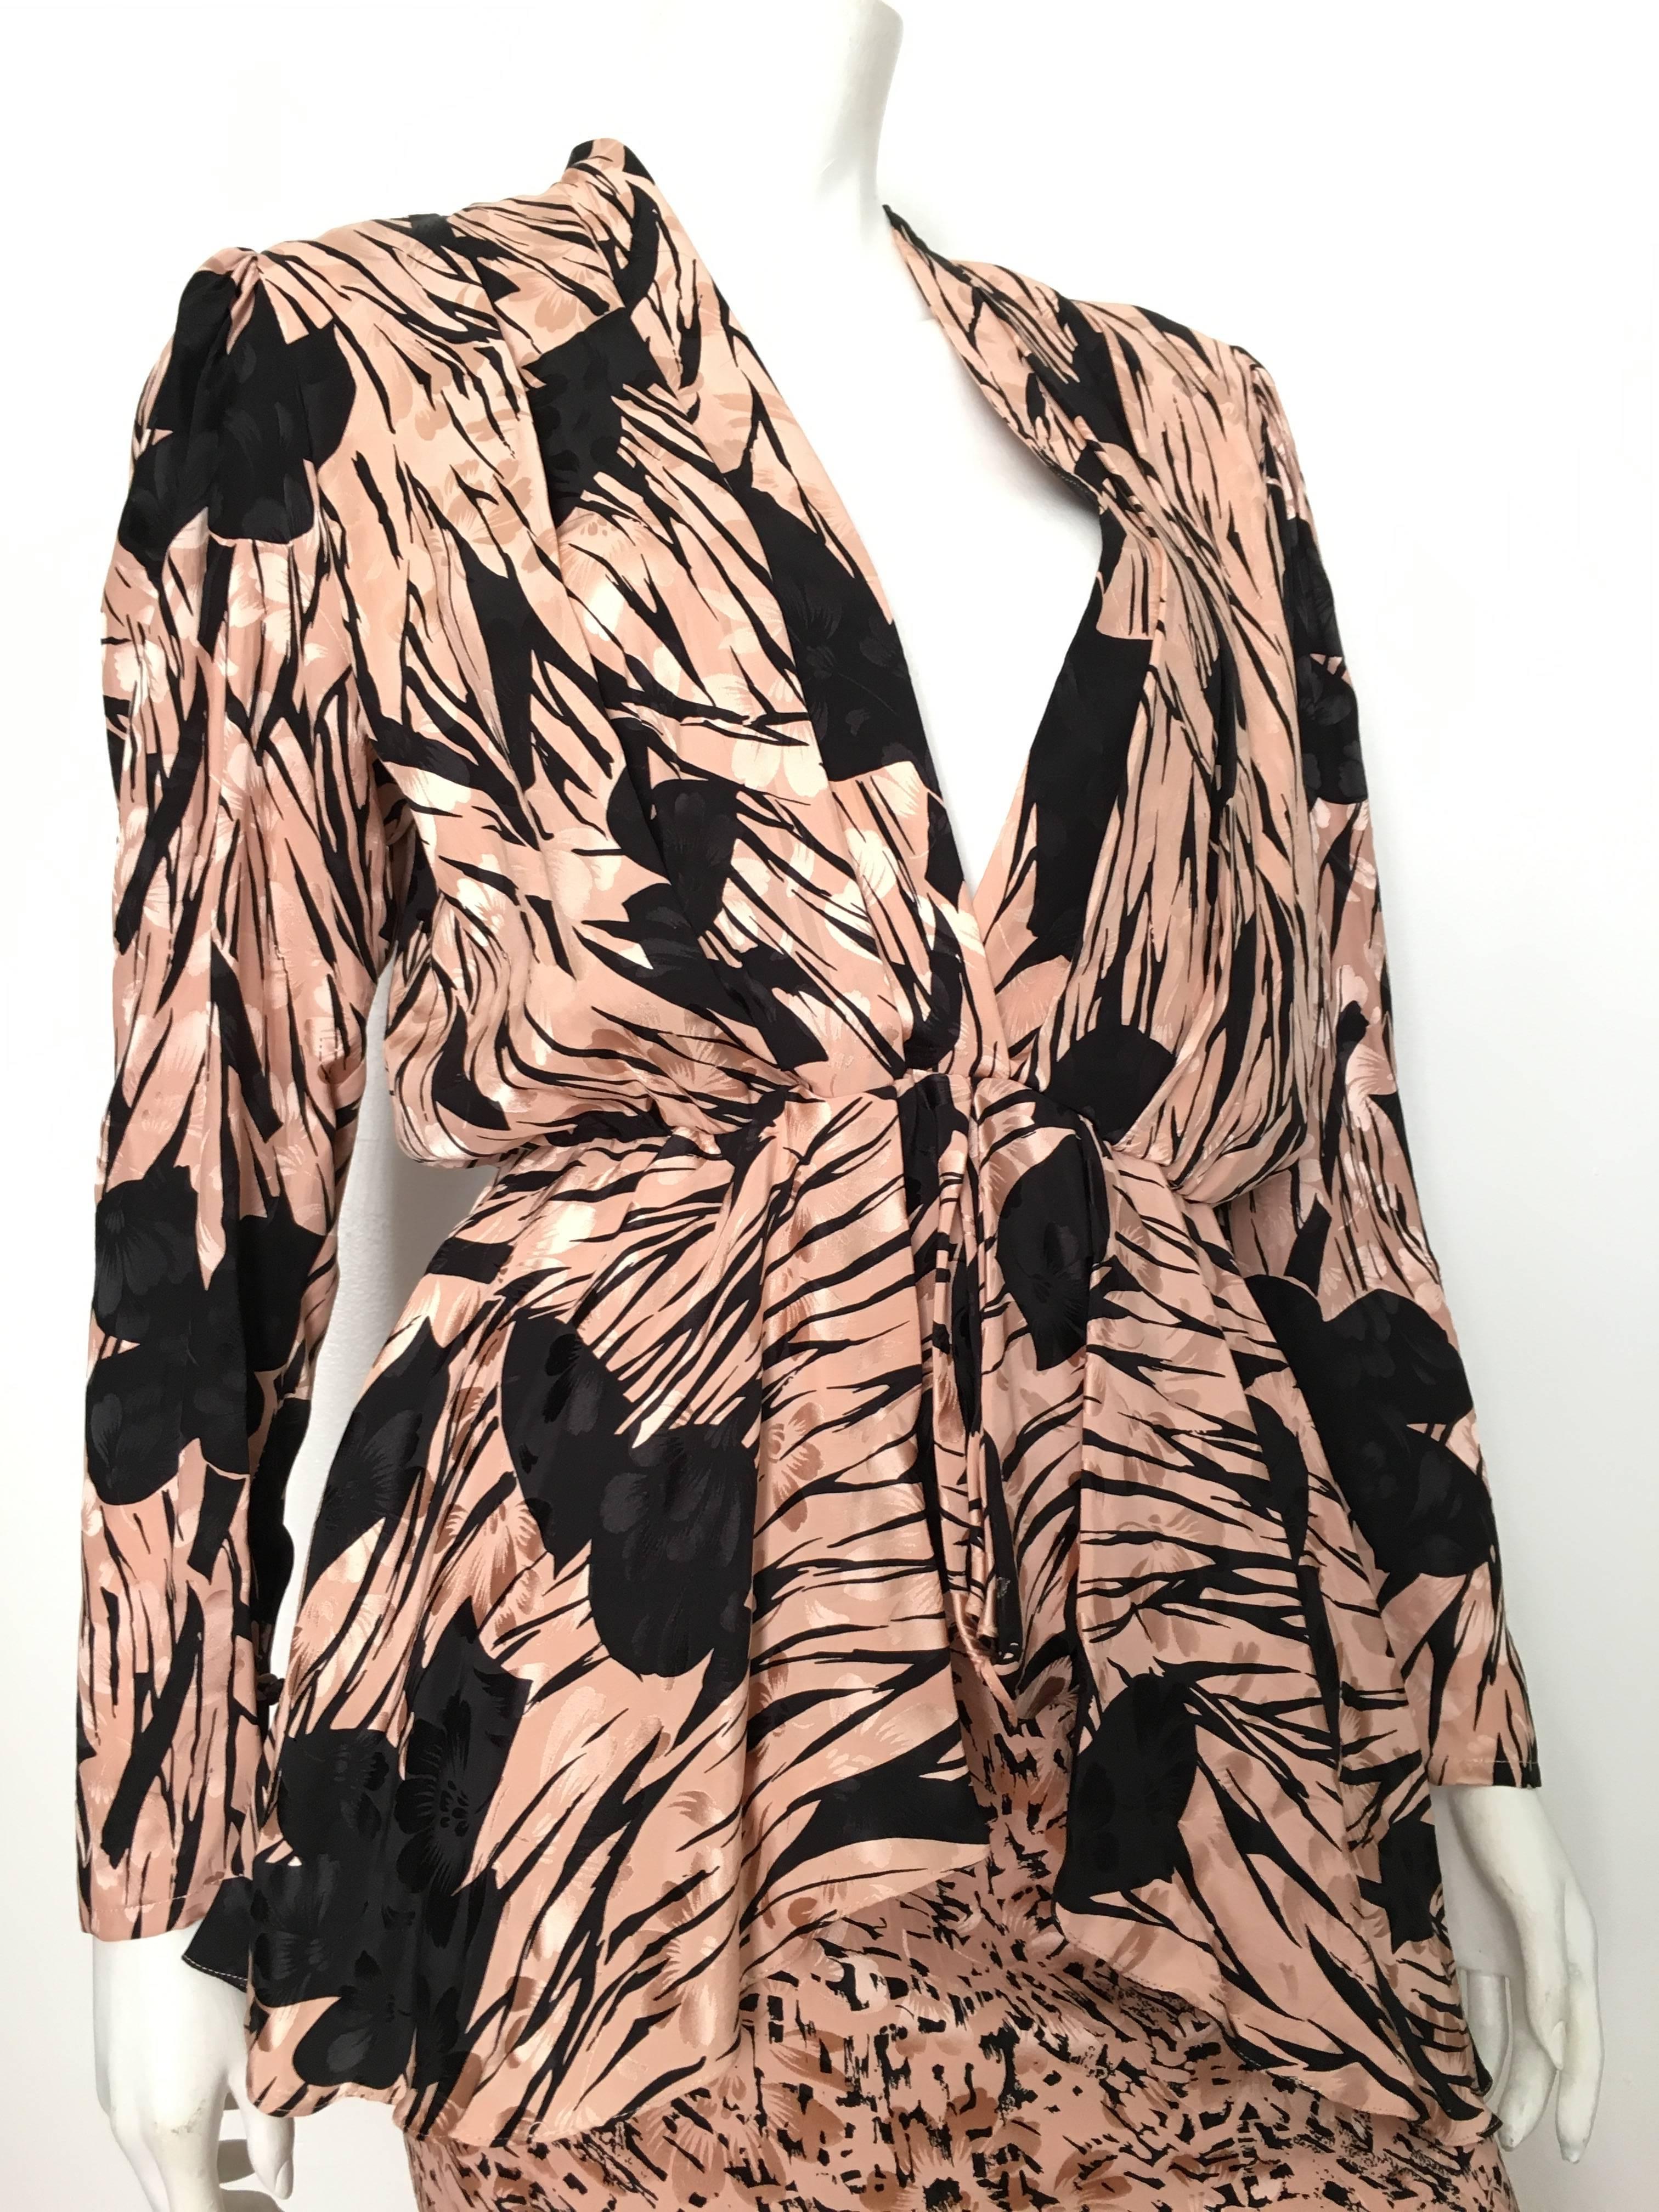 Saint Romei for Neiman Marcus 1980s silk dress is a size 6.  The waist on this dress has an elastic band and is 26